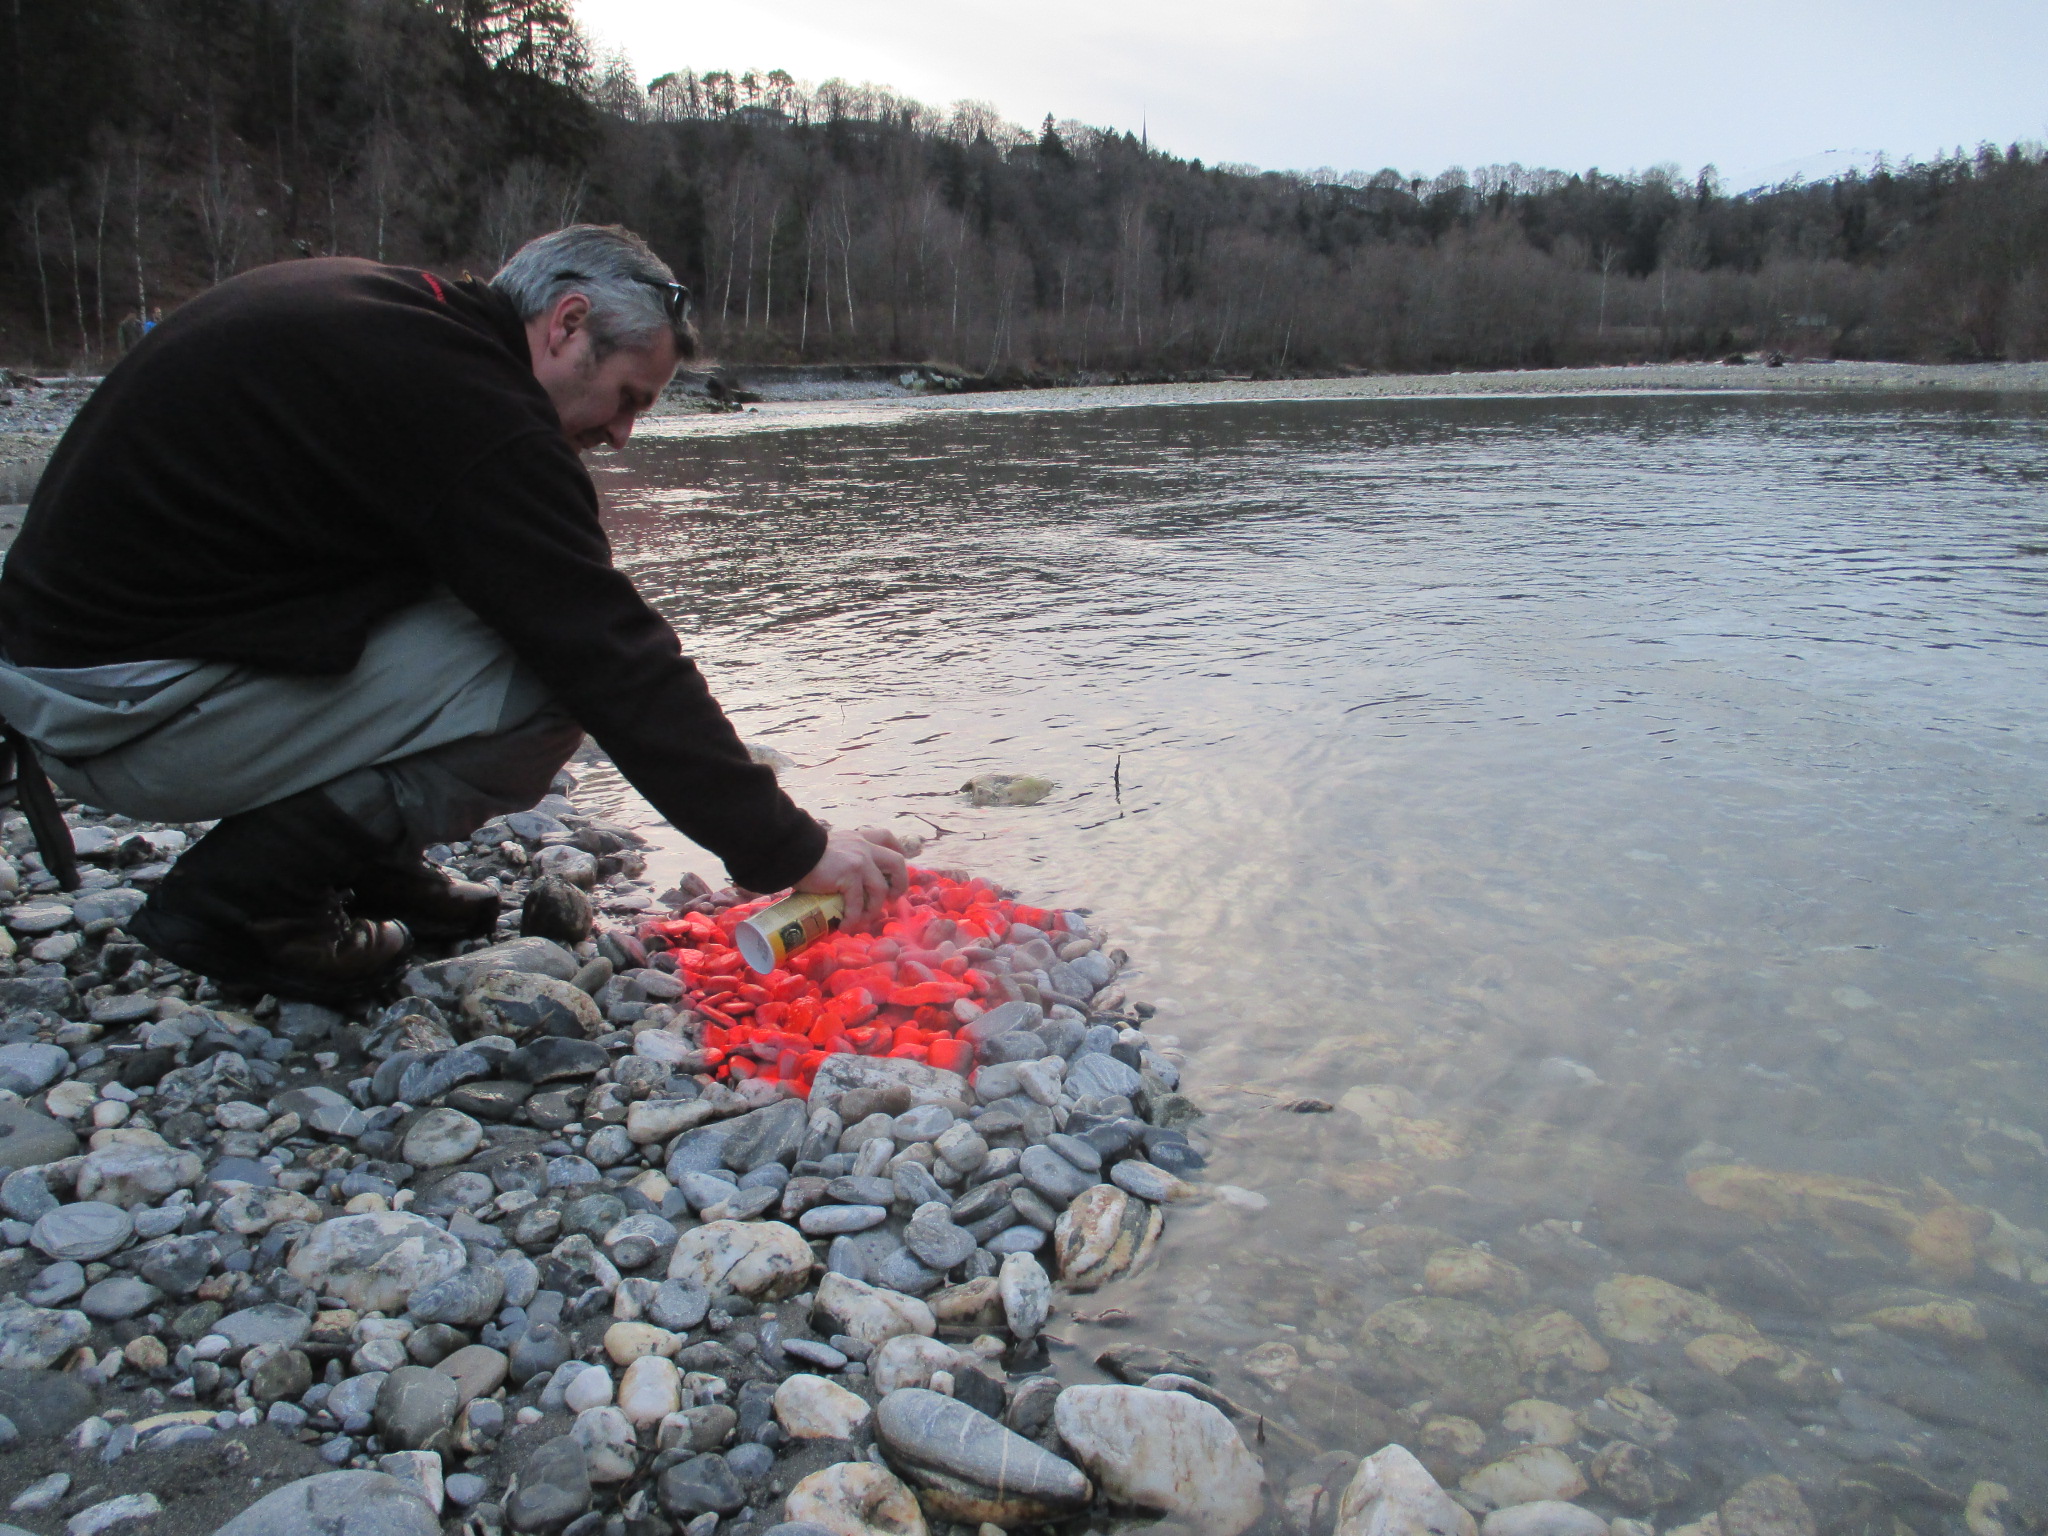 Ricardo Mendez, water and fish biologist in Environment/Water Management, placing markers in the Vorderrhein riverbed for hydro peaking studies.